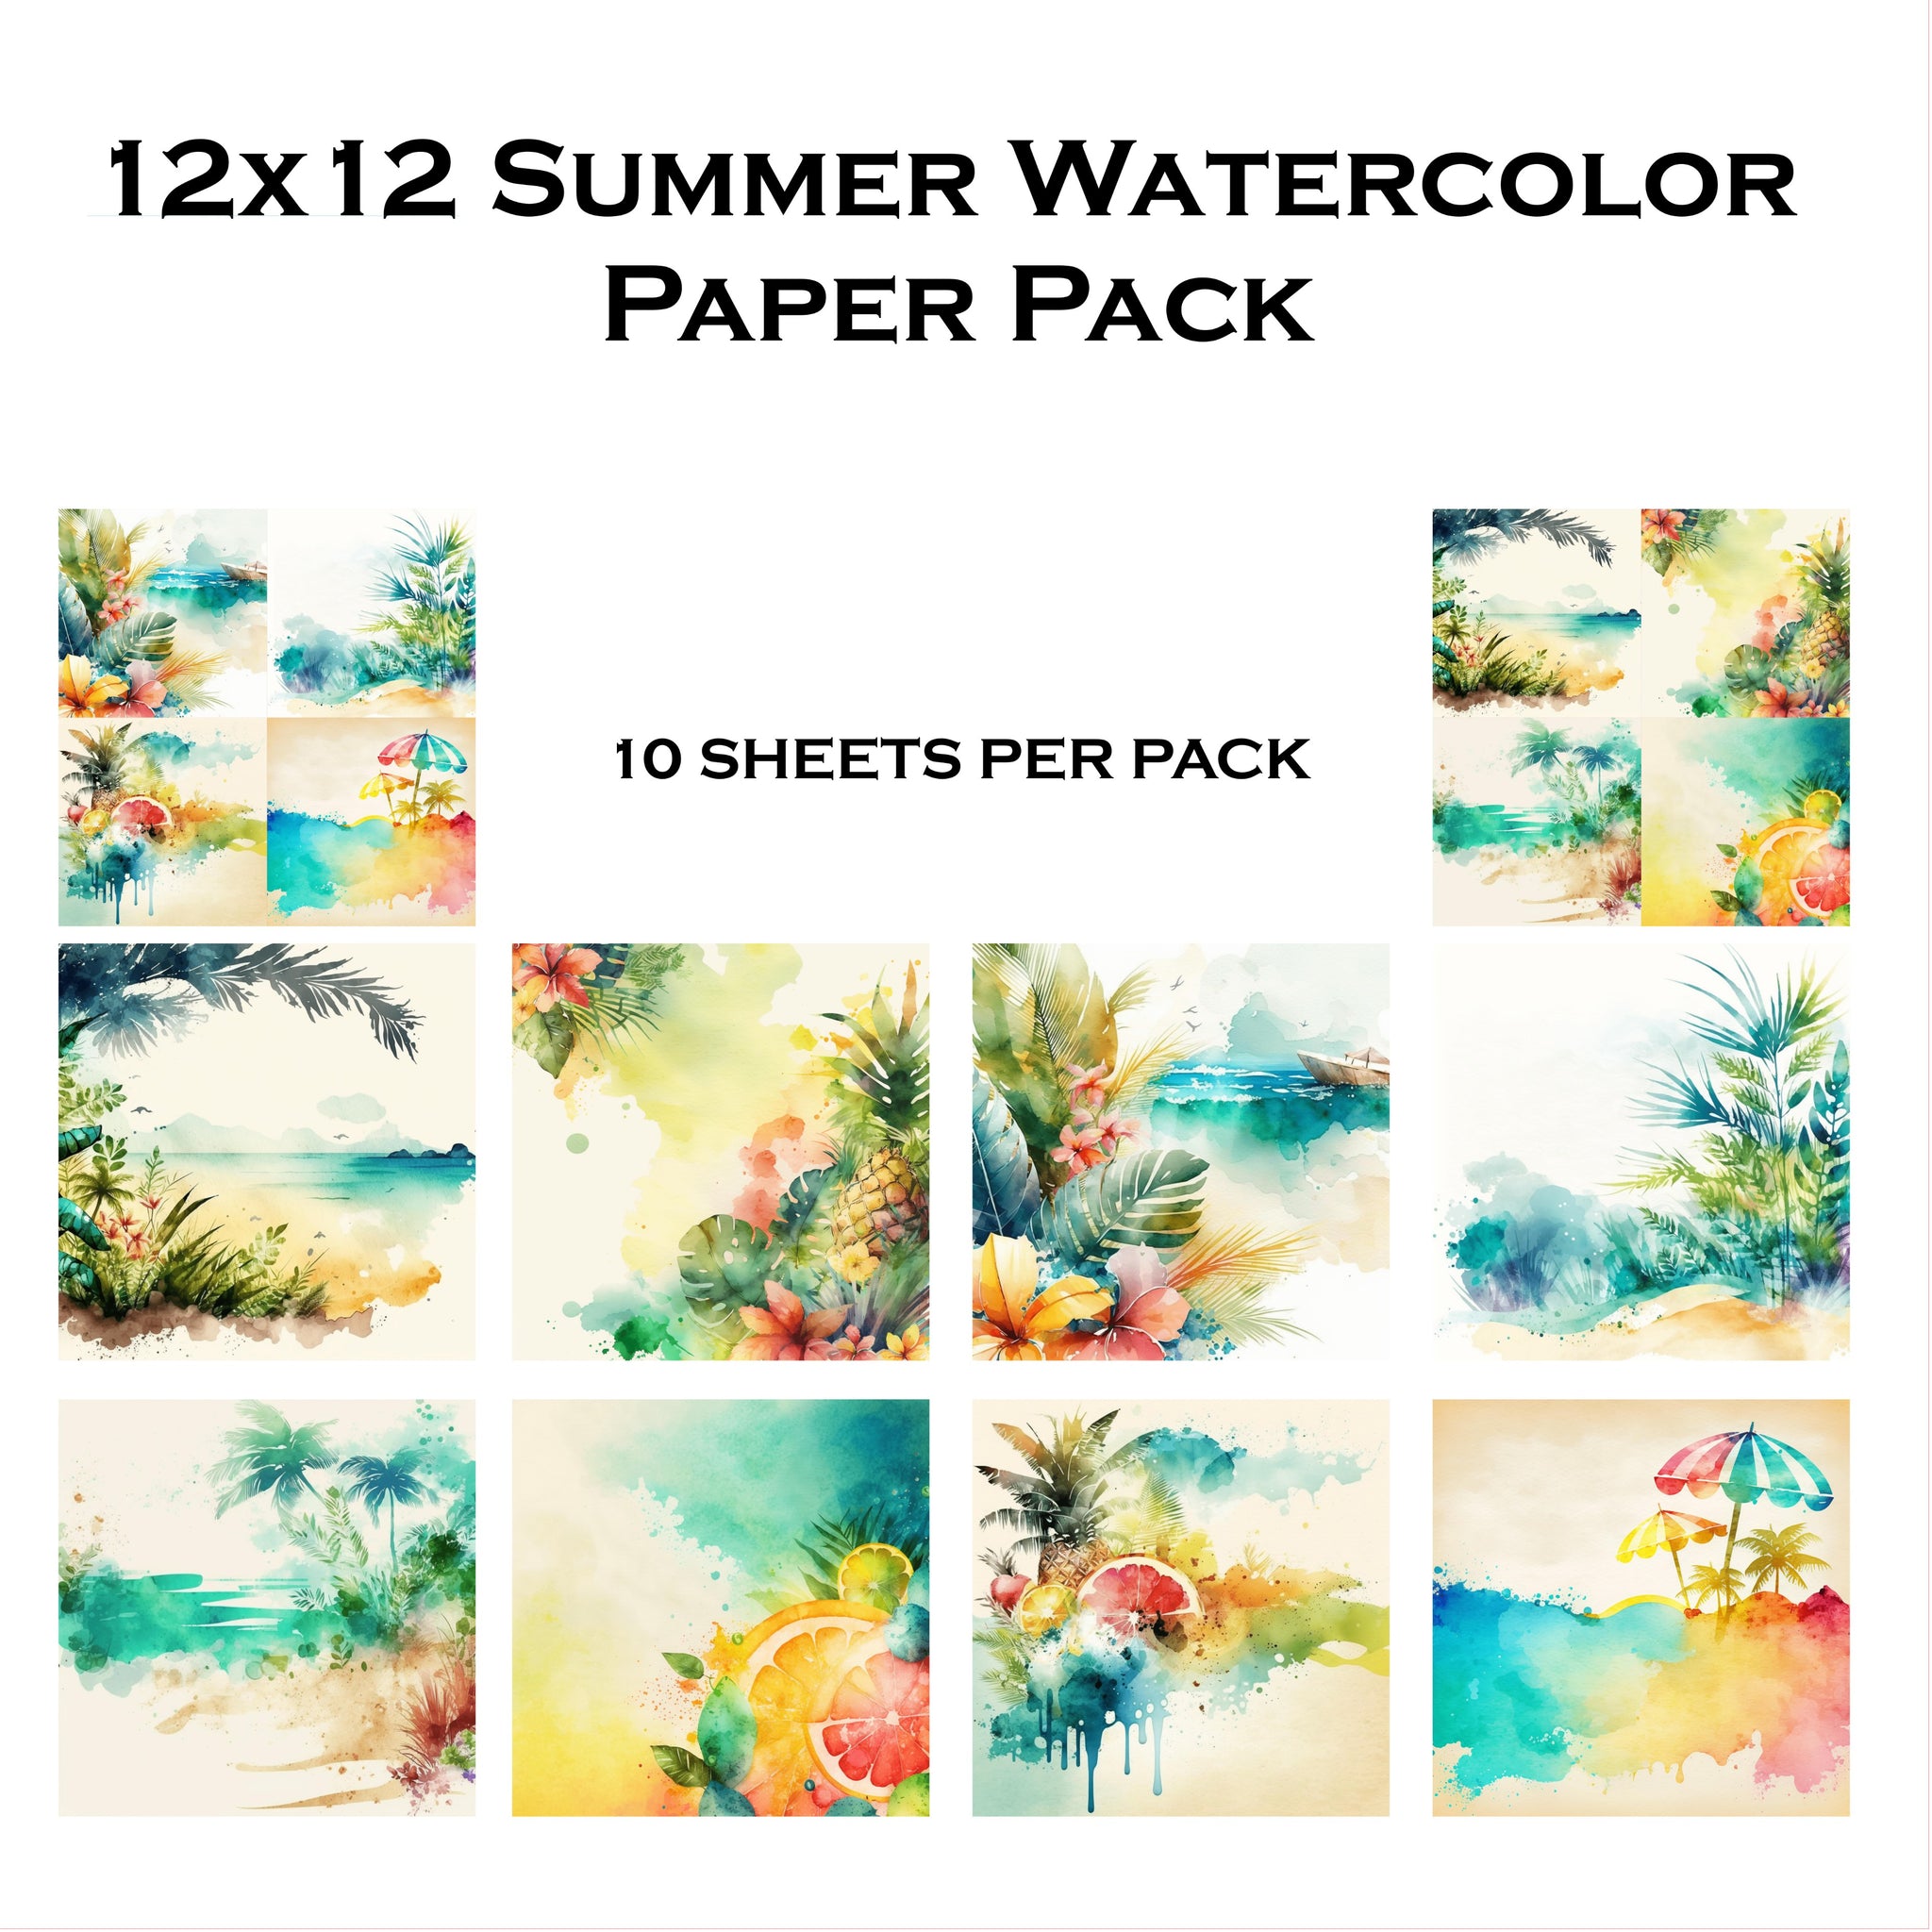 Watercolor Summer 12x12 Paper Pack